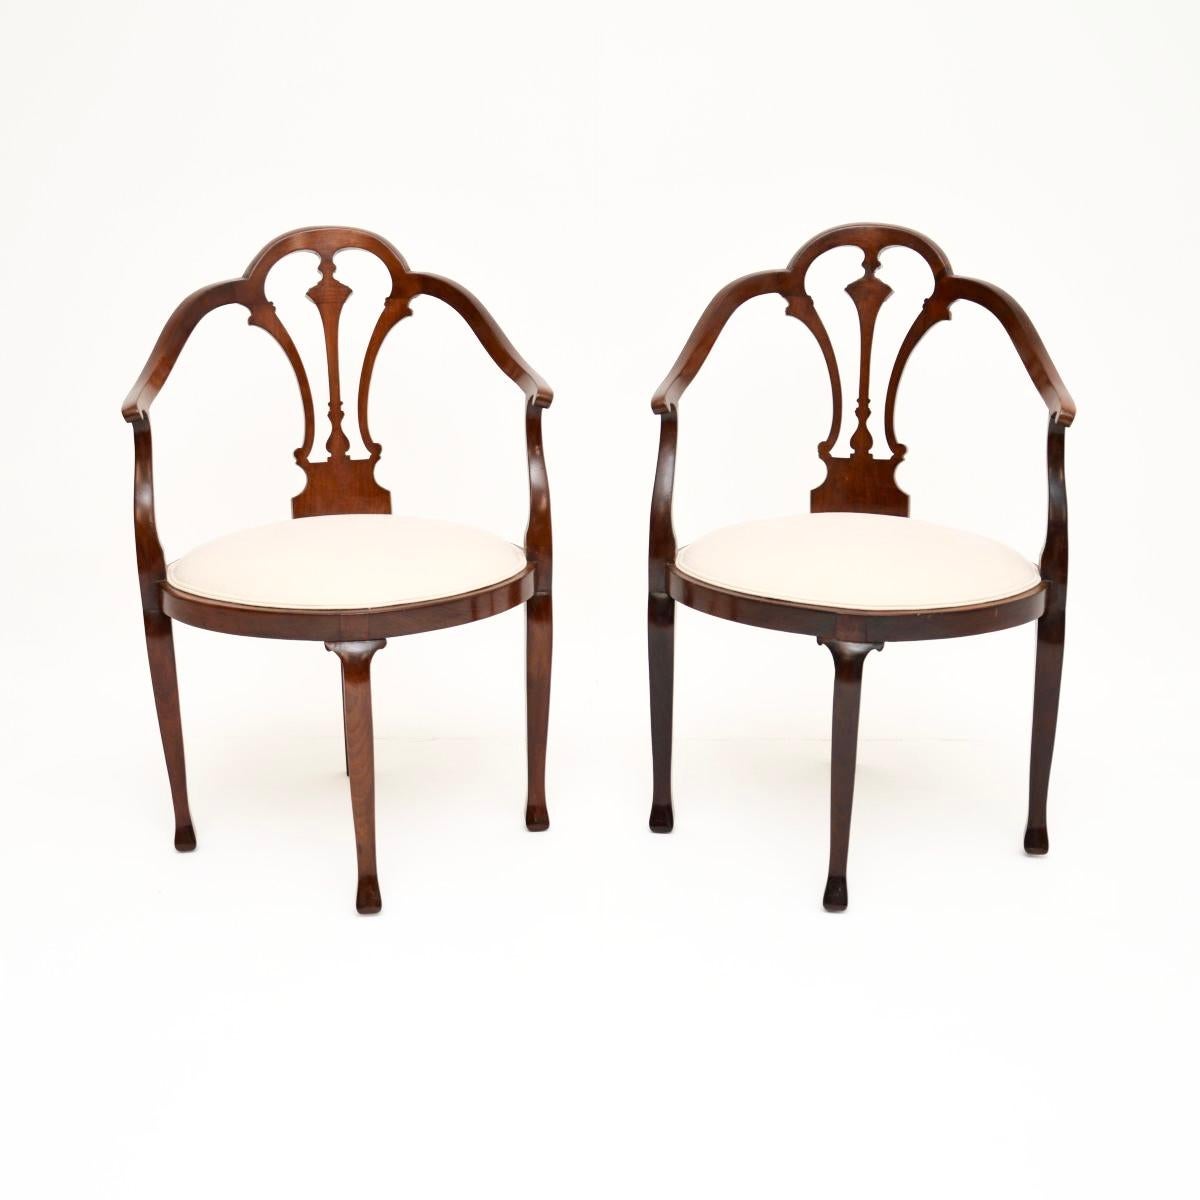 A beautiful pair of antique Edwardian open armchairs. They were made in England, they date from the 1900-1910 period.

The quality is excellent, and they are a lovely size. They would work very well in various settings around the home, as bedroom